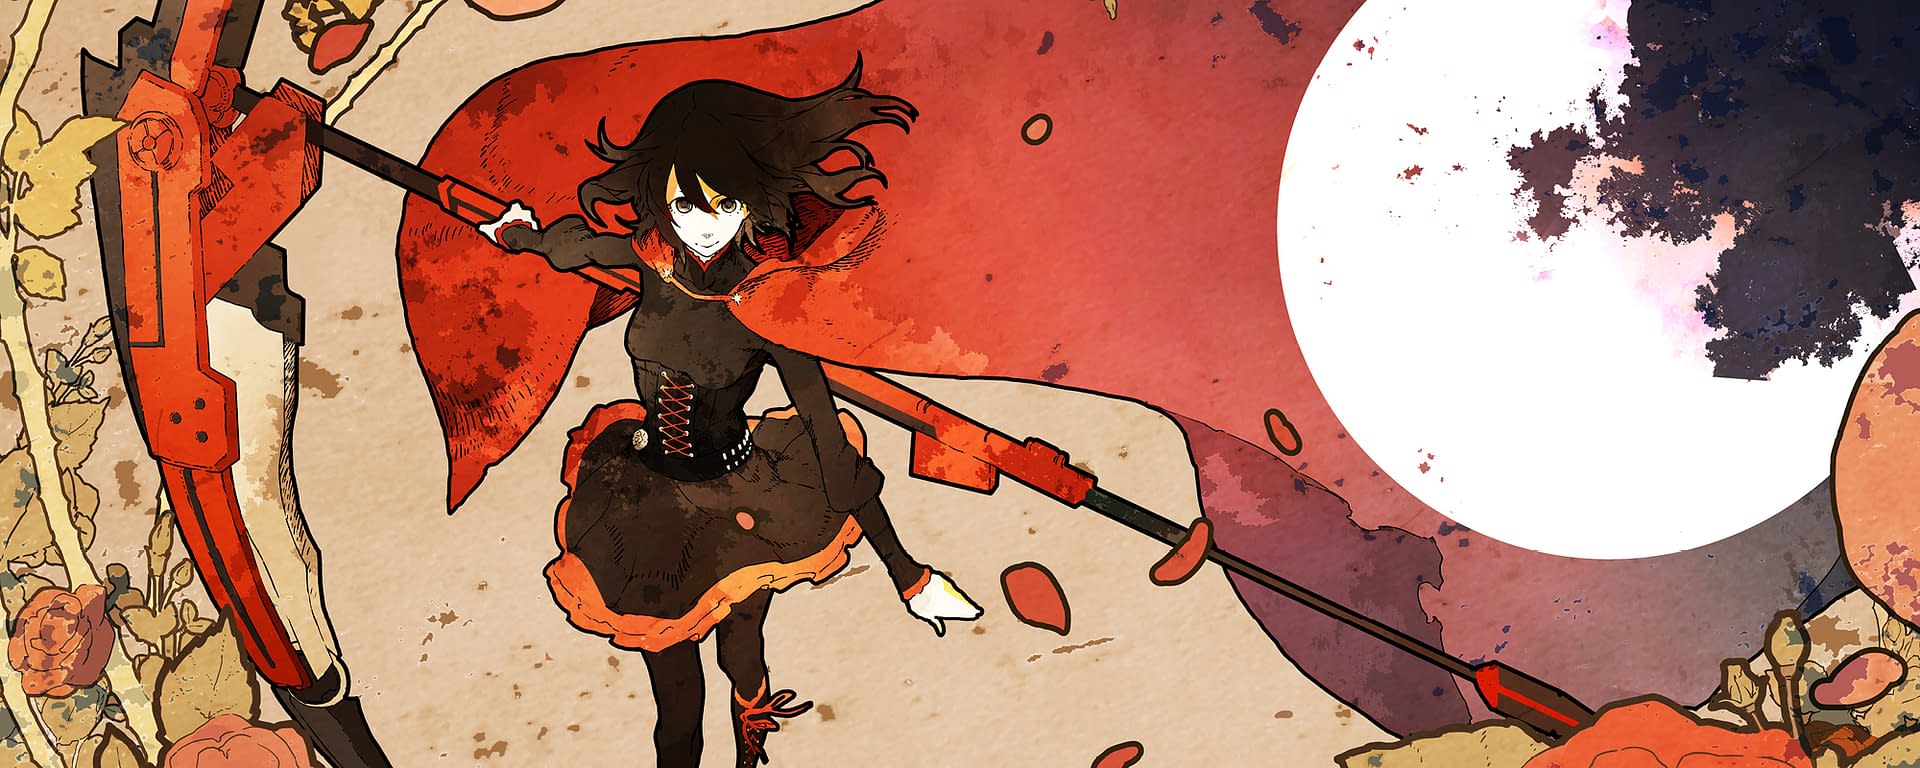 Rwby The Official Manga From Us Anime Series Coming From Viz Media